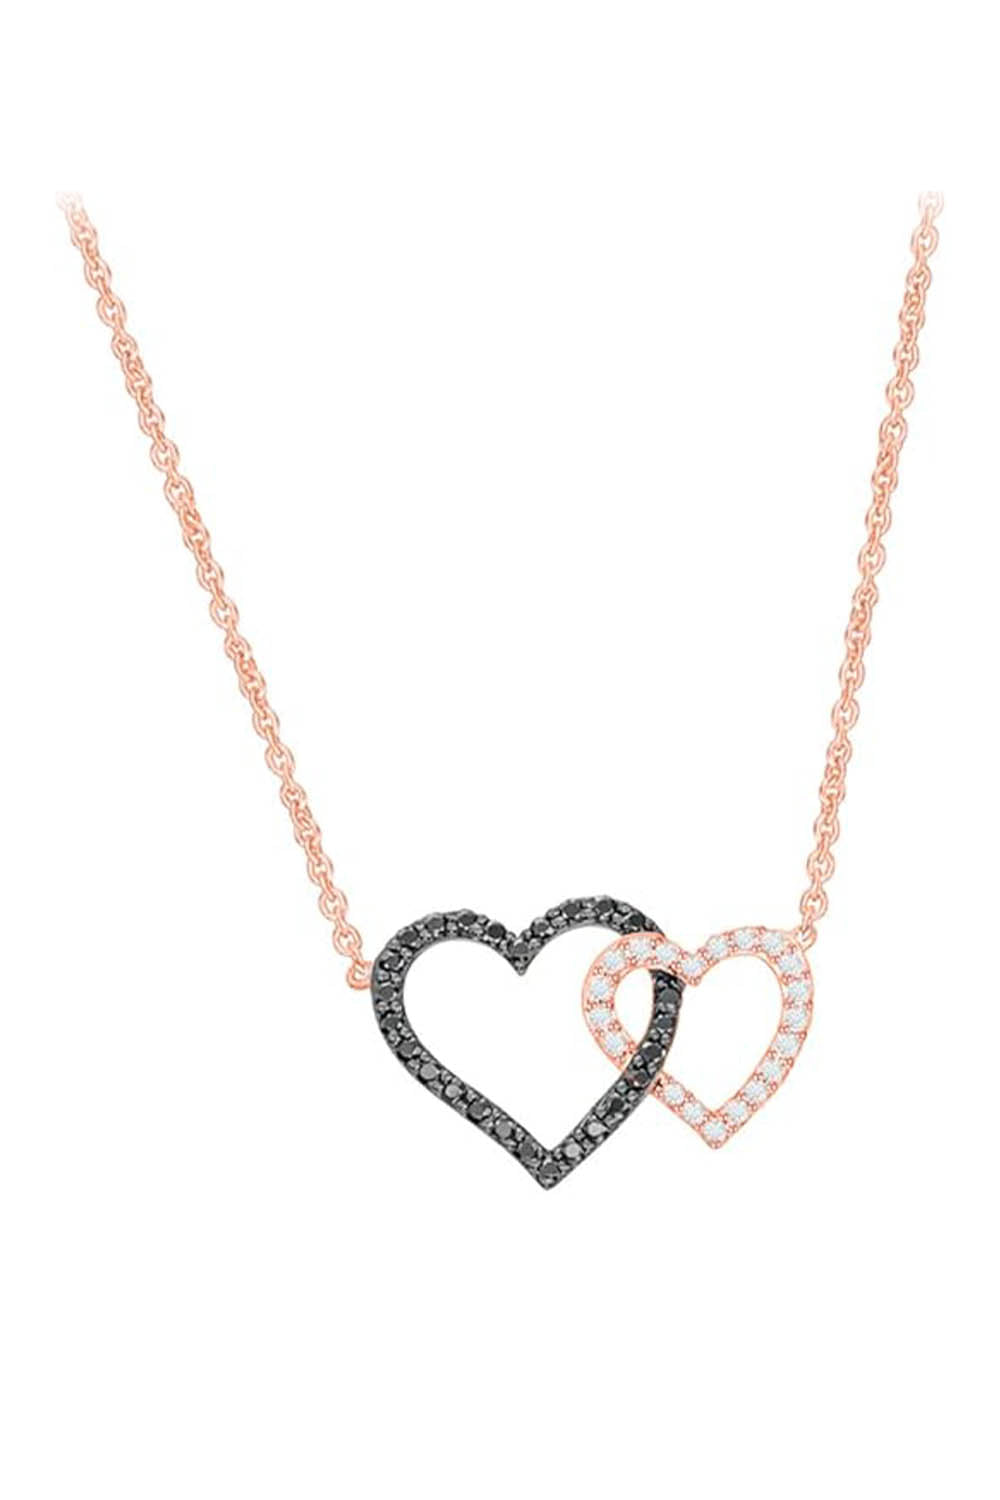 Rose Gold Color Black and White Interlocking Heart Necklace